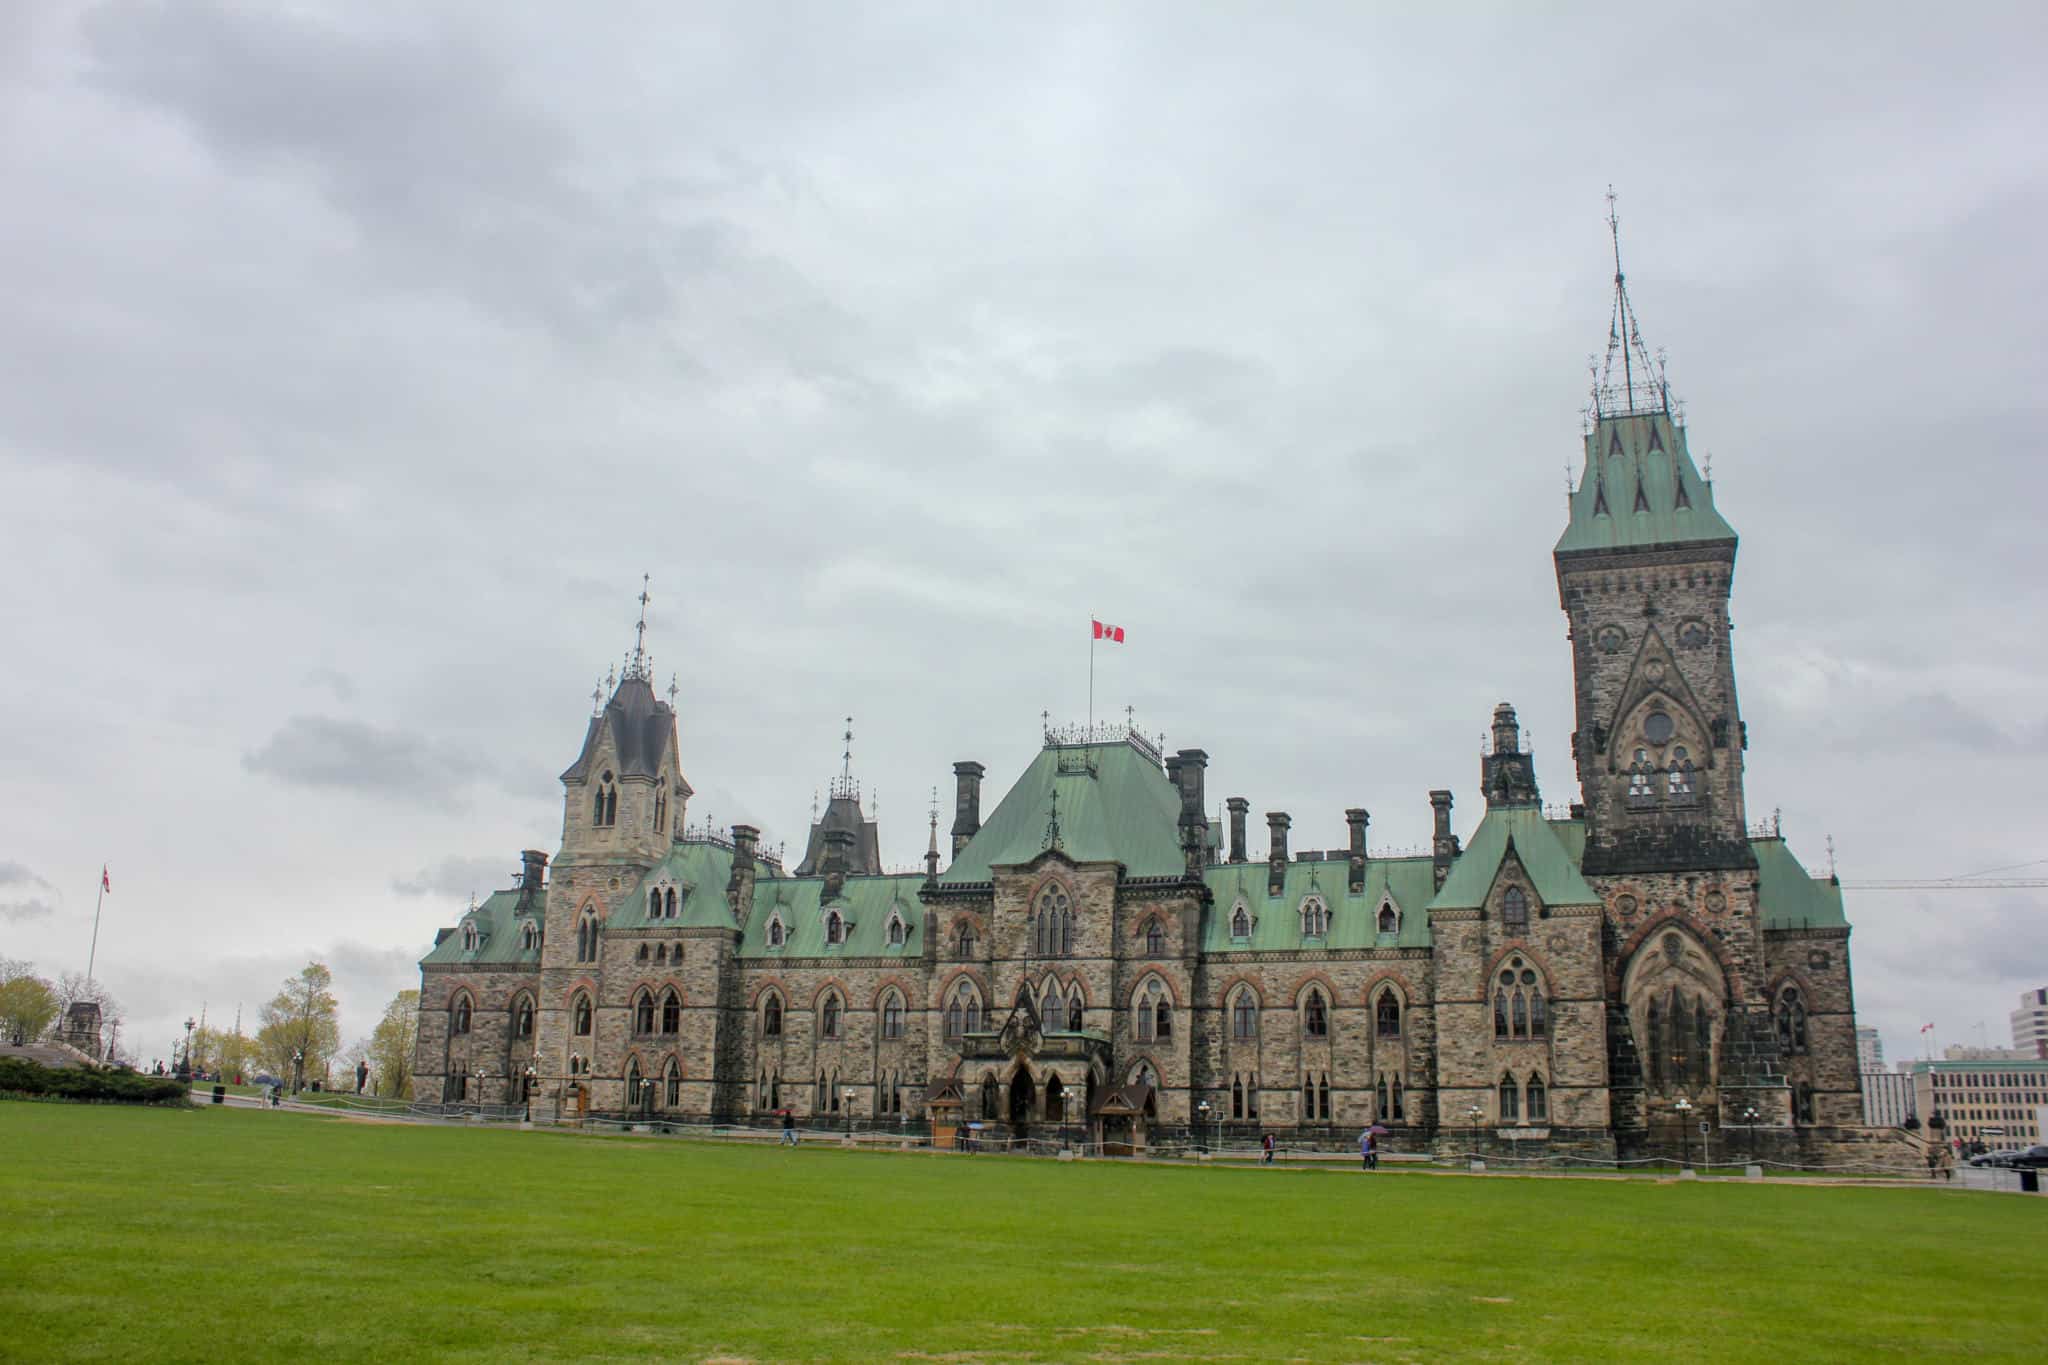 Touring Parliament Hill is one of the things to do in Ottawa